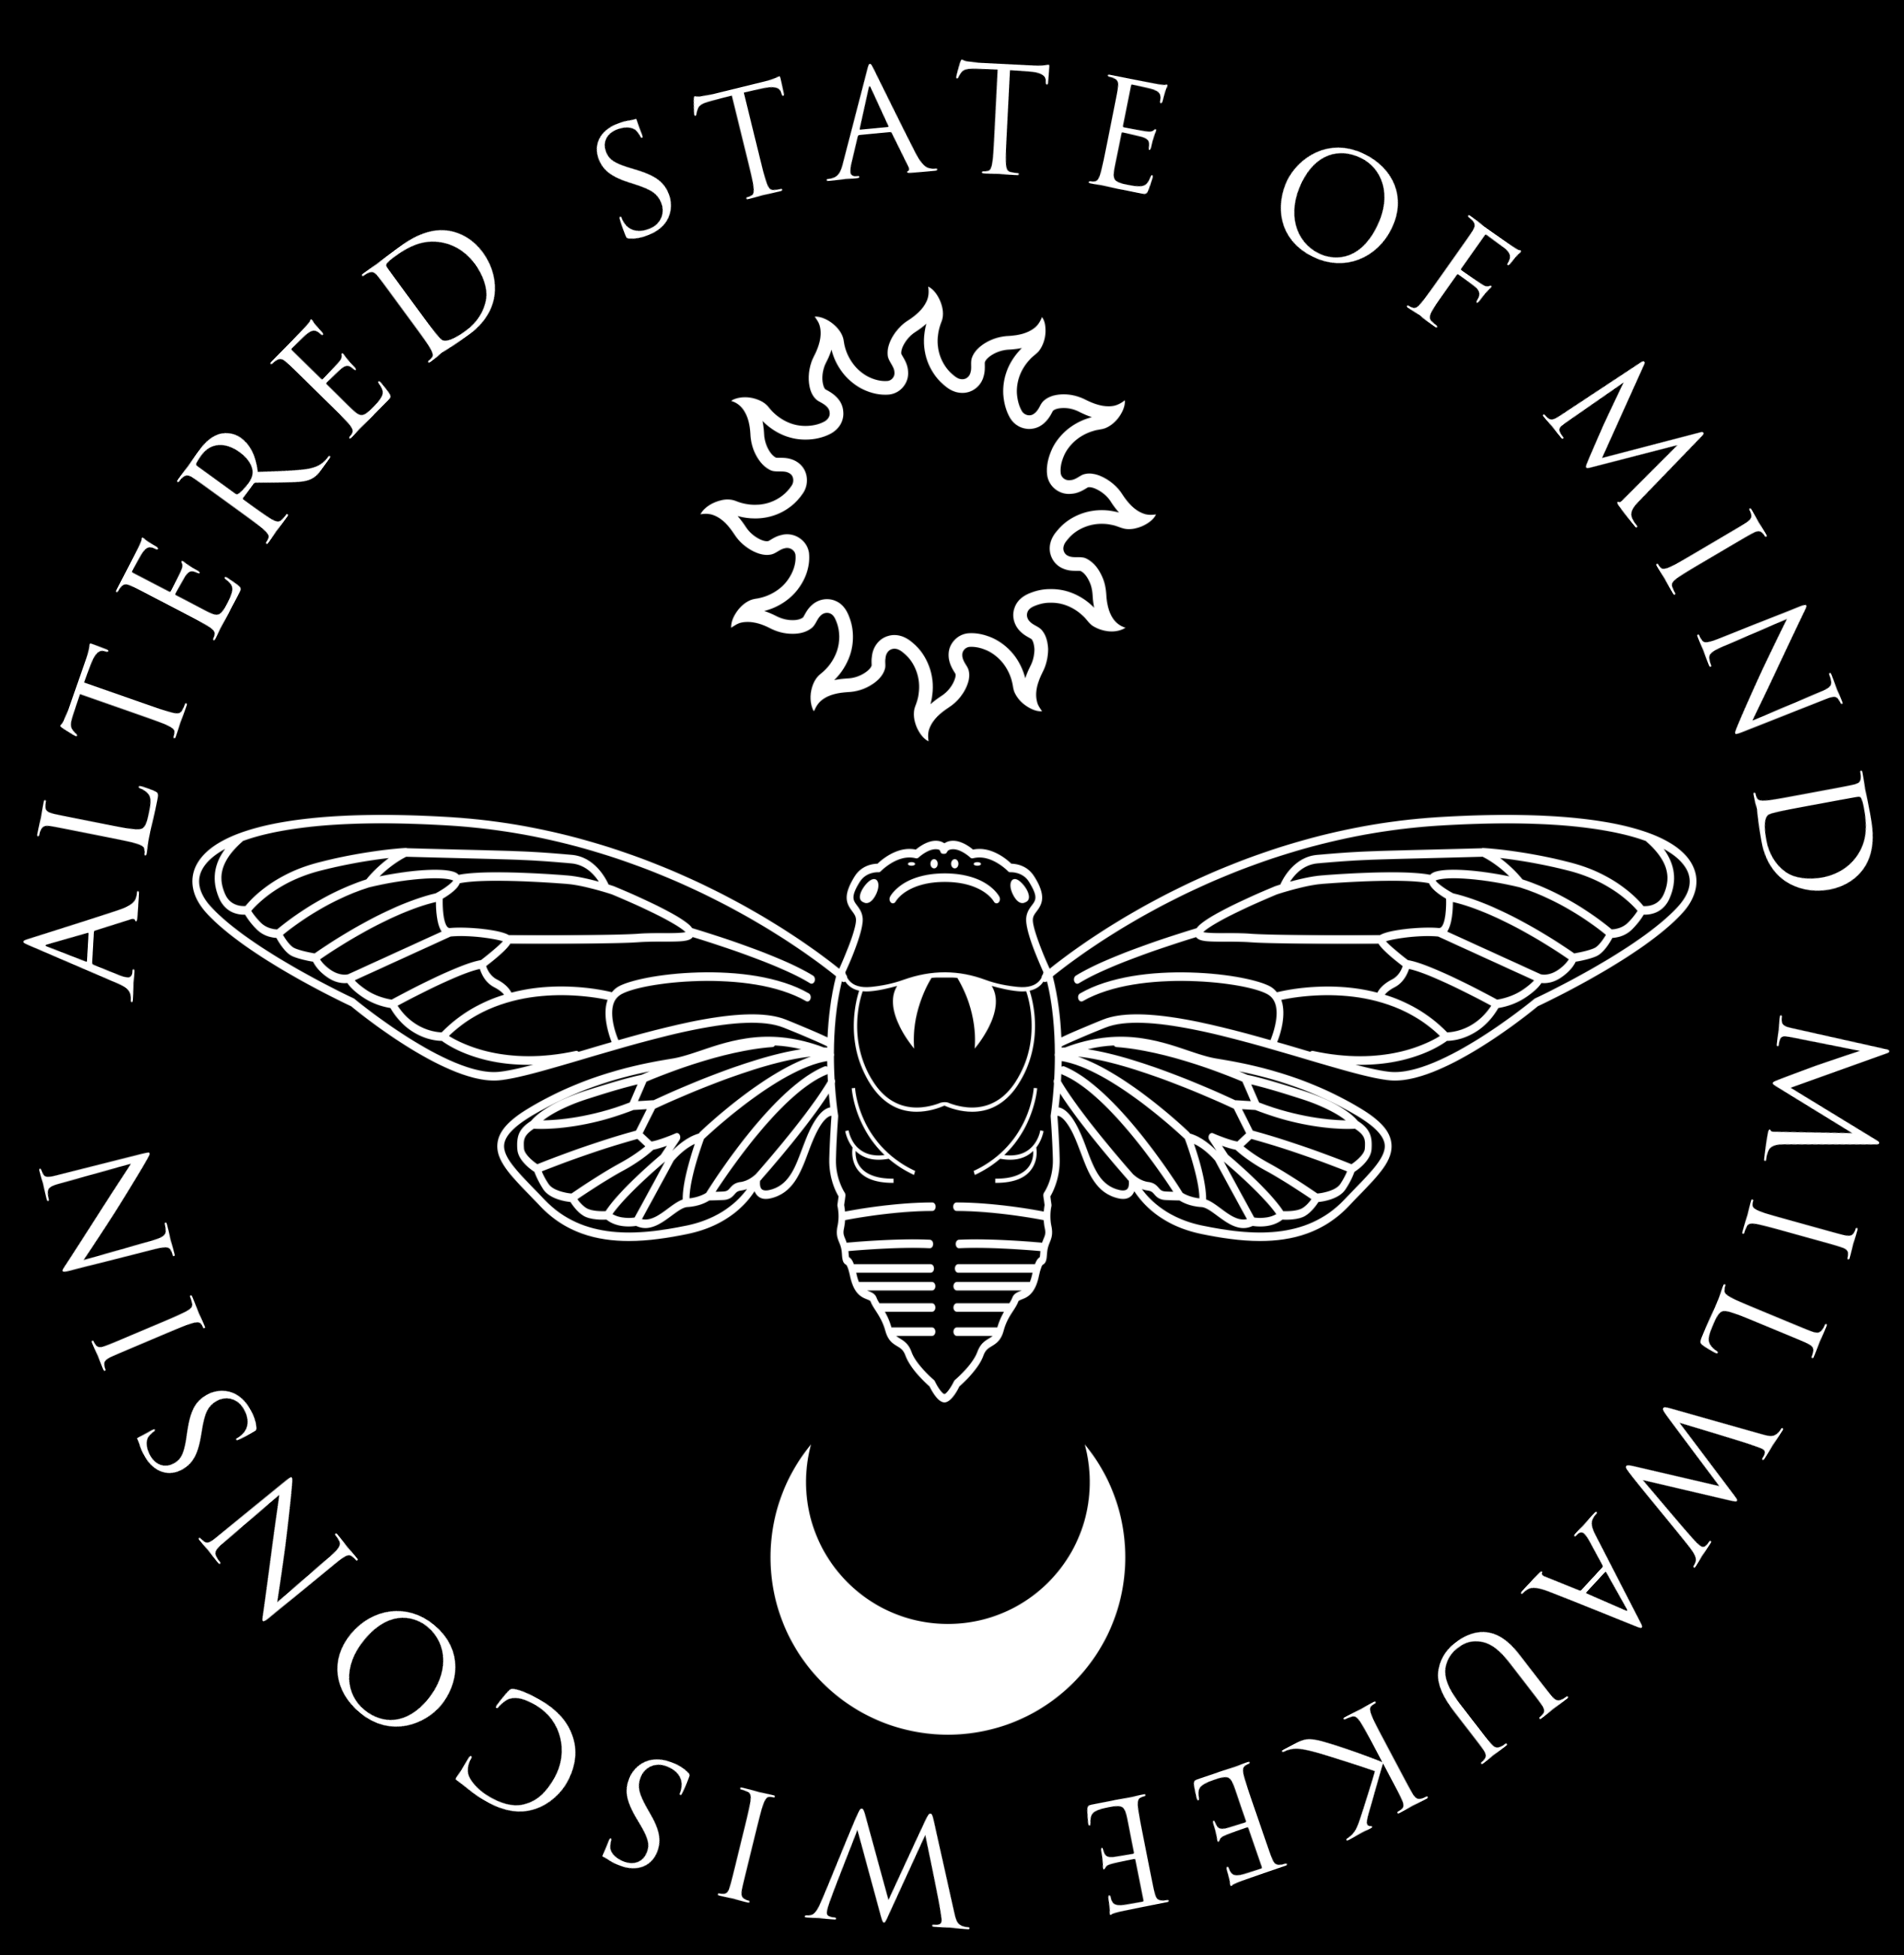 ALTERED STATE OF MIND